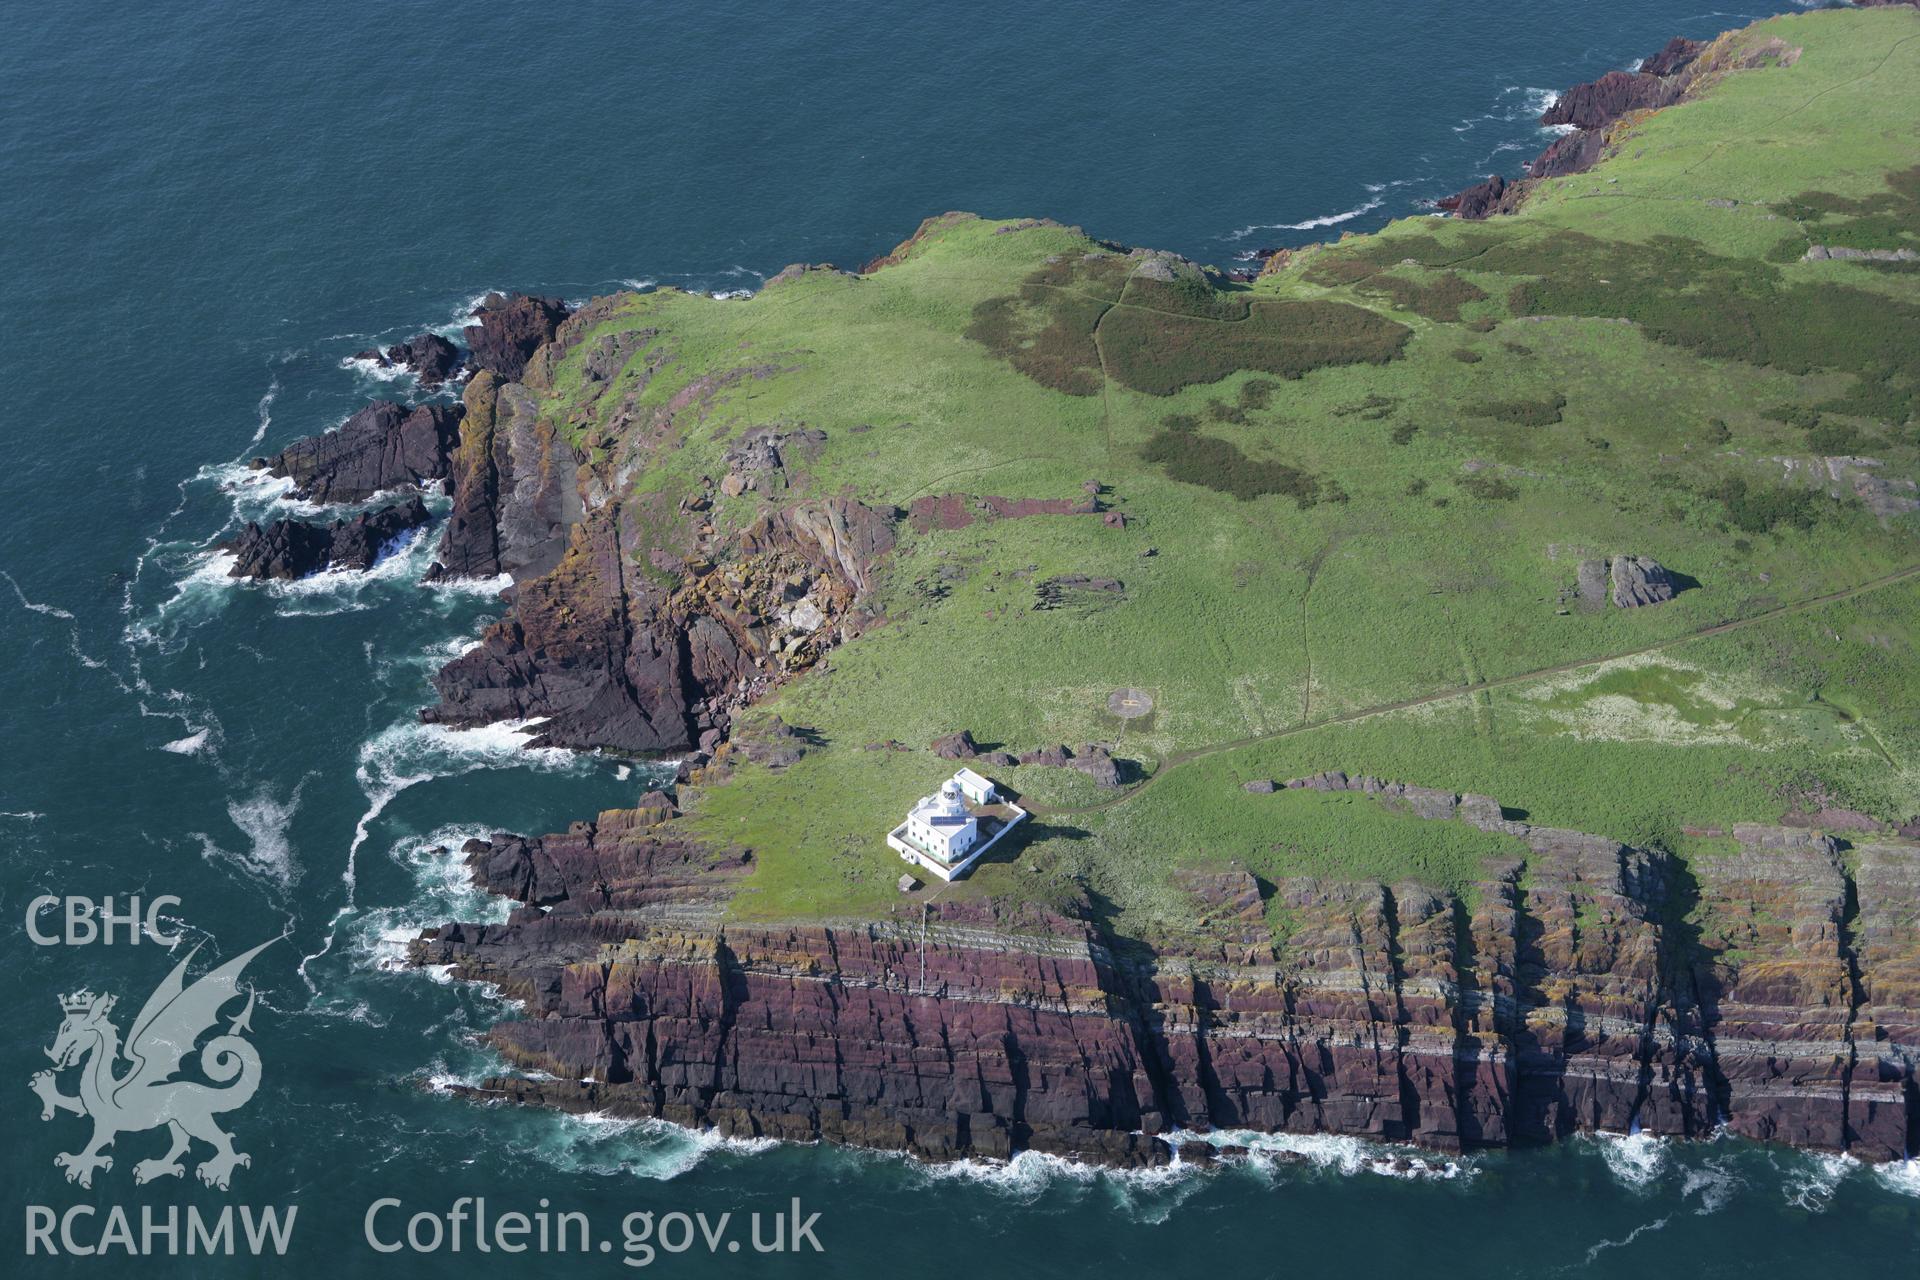 RCAHMW colour oblique aerial photograph of Skokholm Island. Taken on 30 July 2007 by Toby Driver